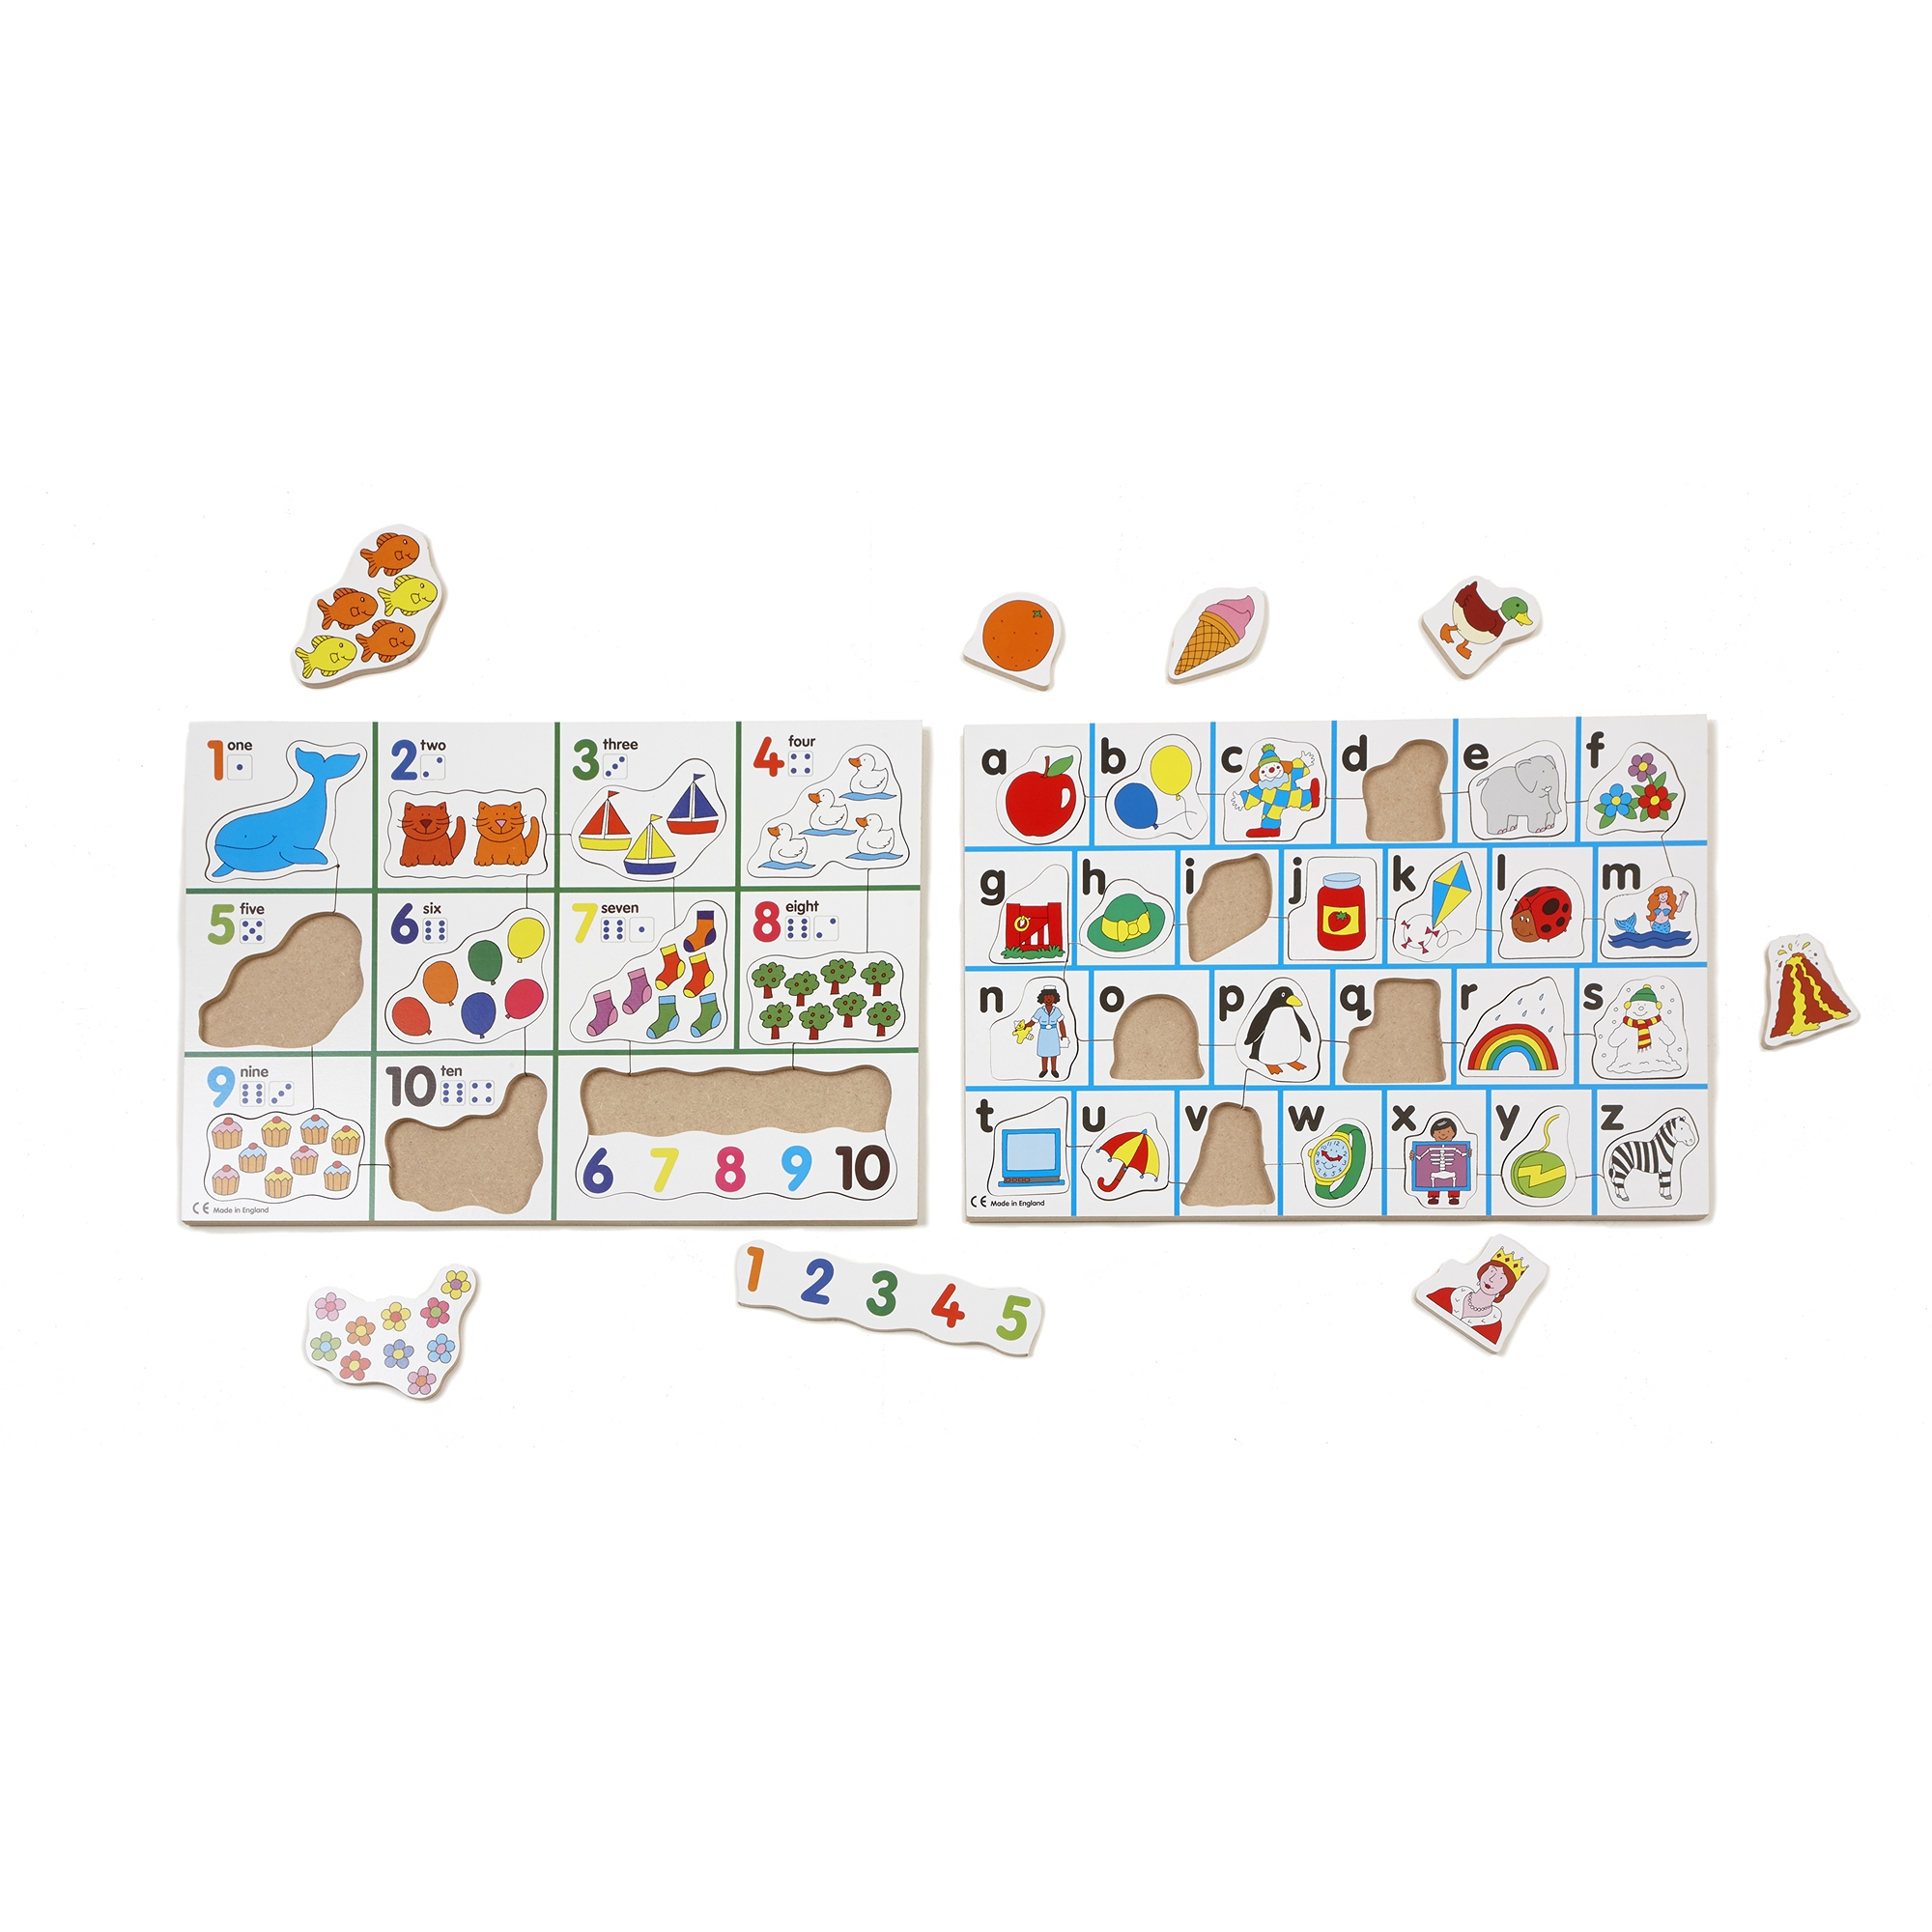 Alphabet And Numbers Jigsaw Offer